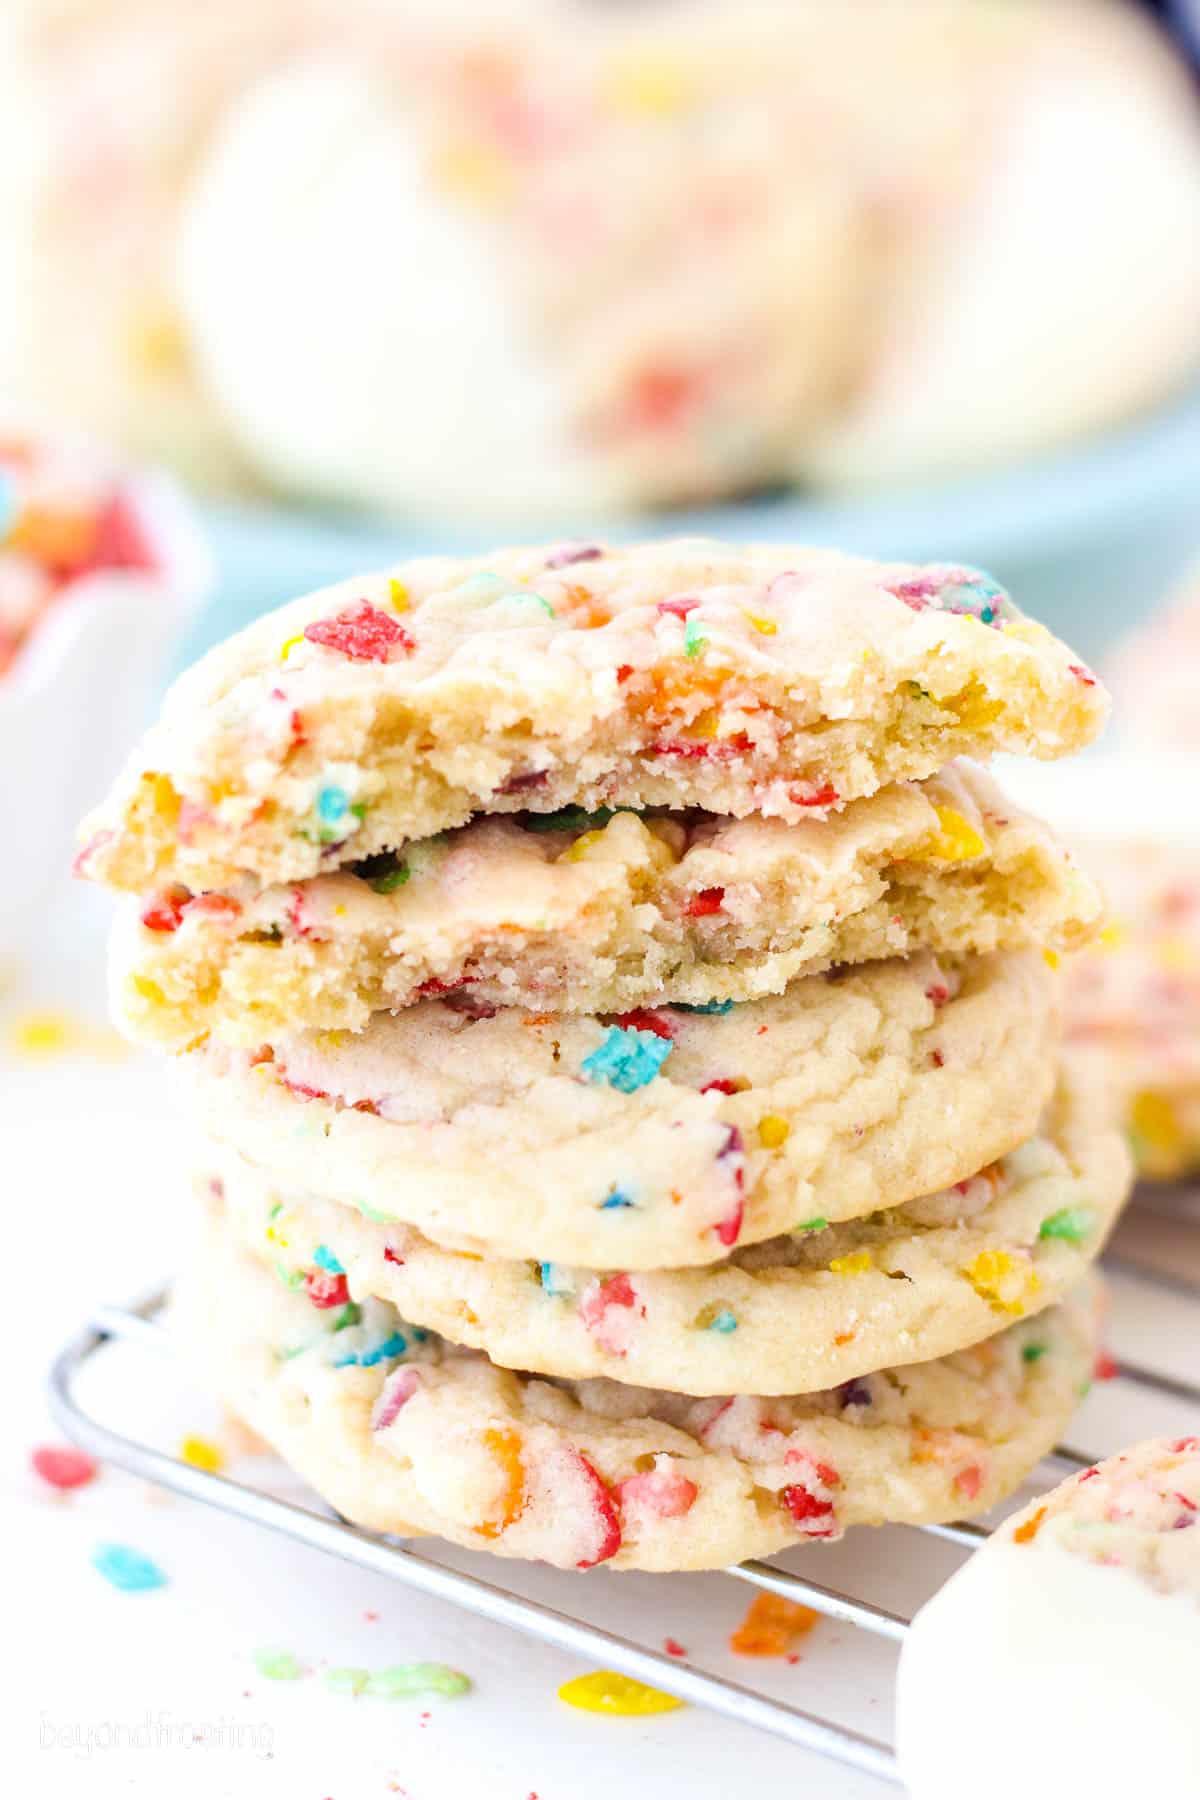 A stack of Fruity Pebble cookies on a wire rack, with the top cookie broken in half.